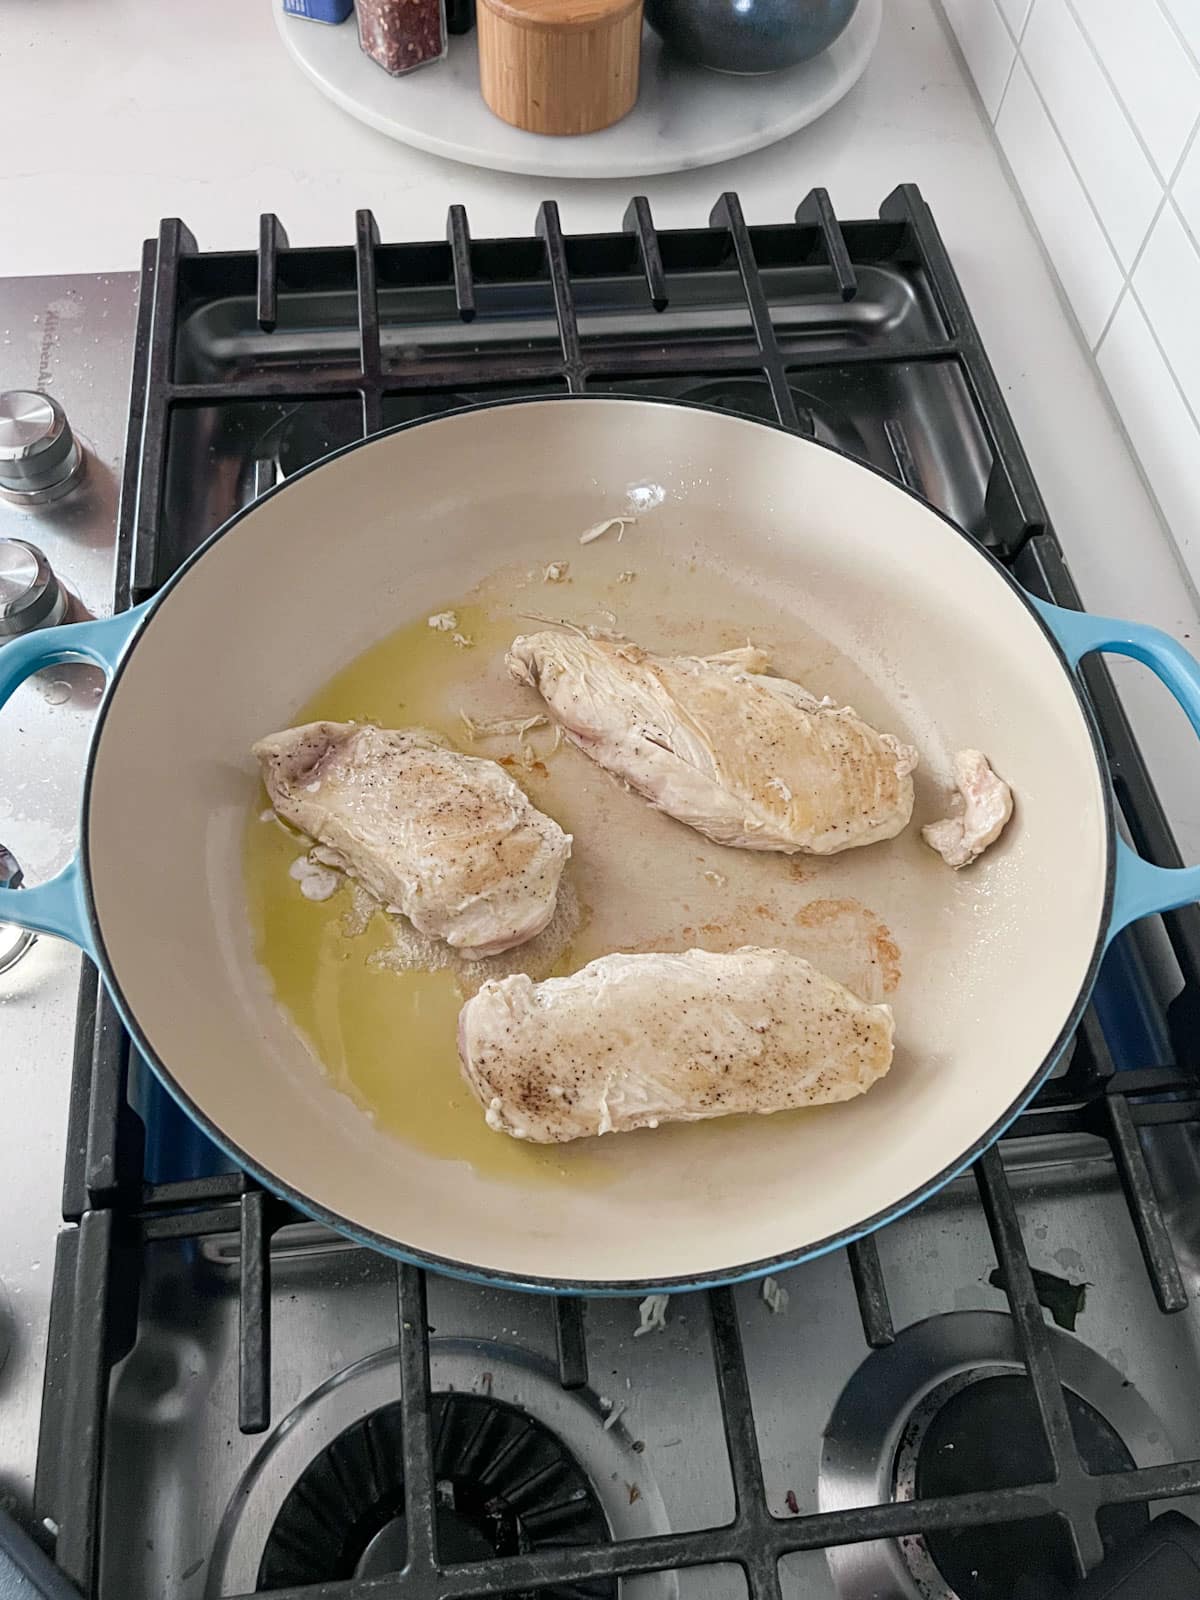 Chicken breasts being seared in oil in a blue pan on a stove.